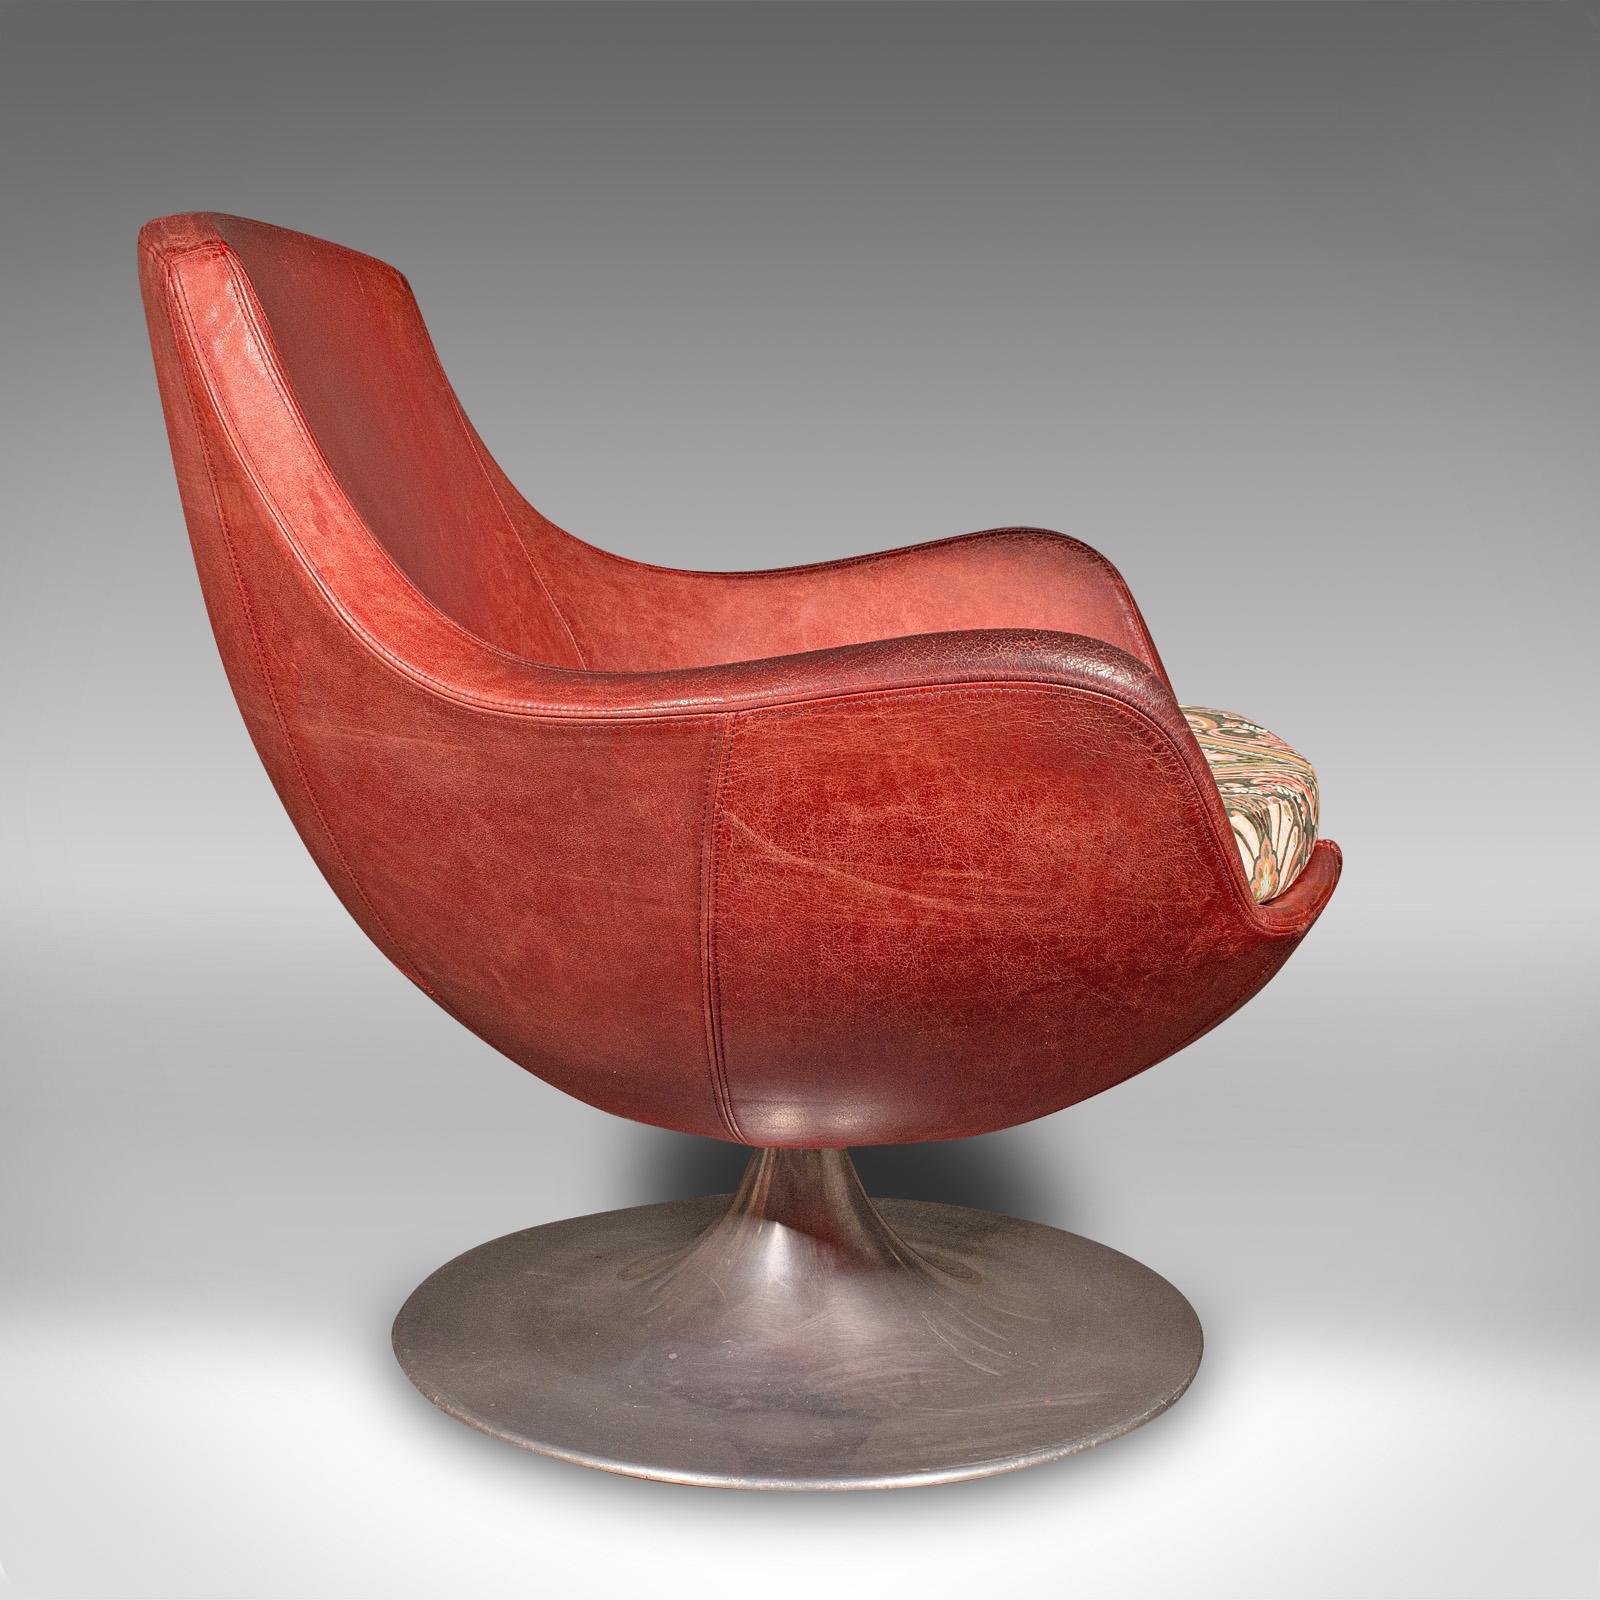 Mid-Century Modern Vintage Swivel Tub Chair, Italian Leather Lounge Seat, Late 20th Century, C.1970 For Sale